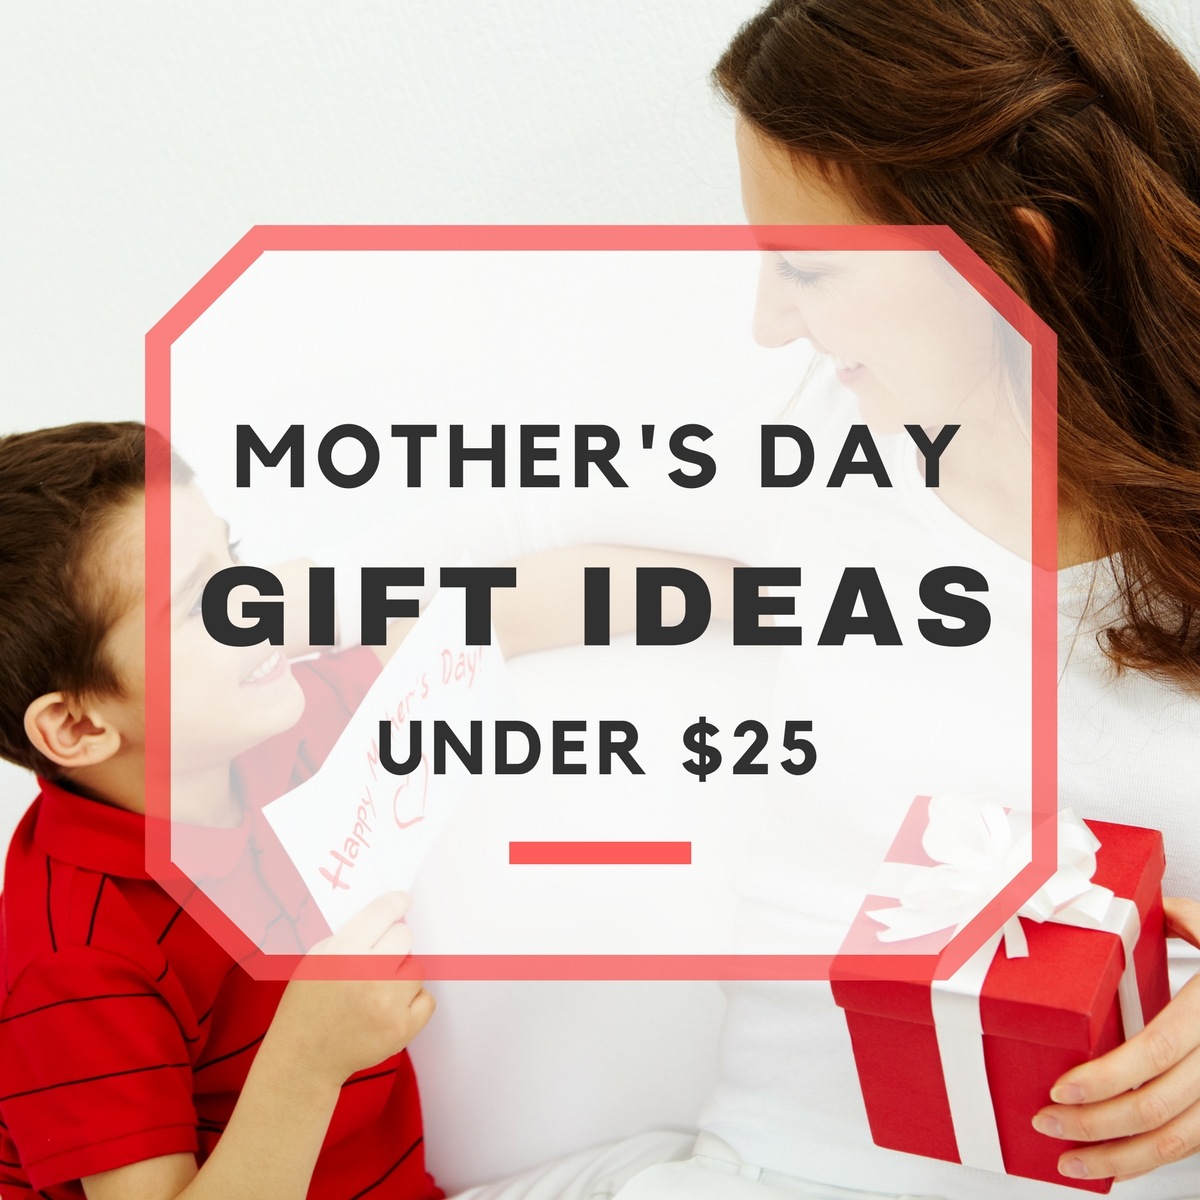 10 Good Mother’s Day Gift Ideas Under $25